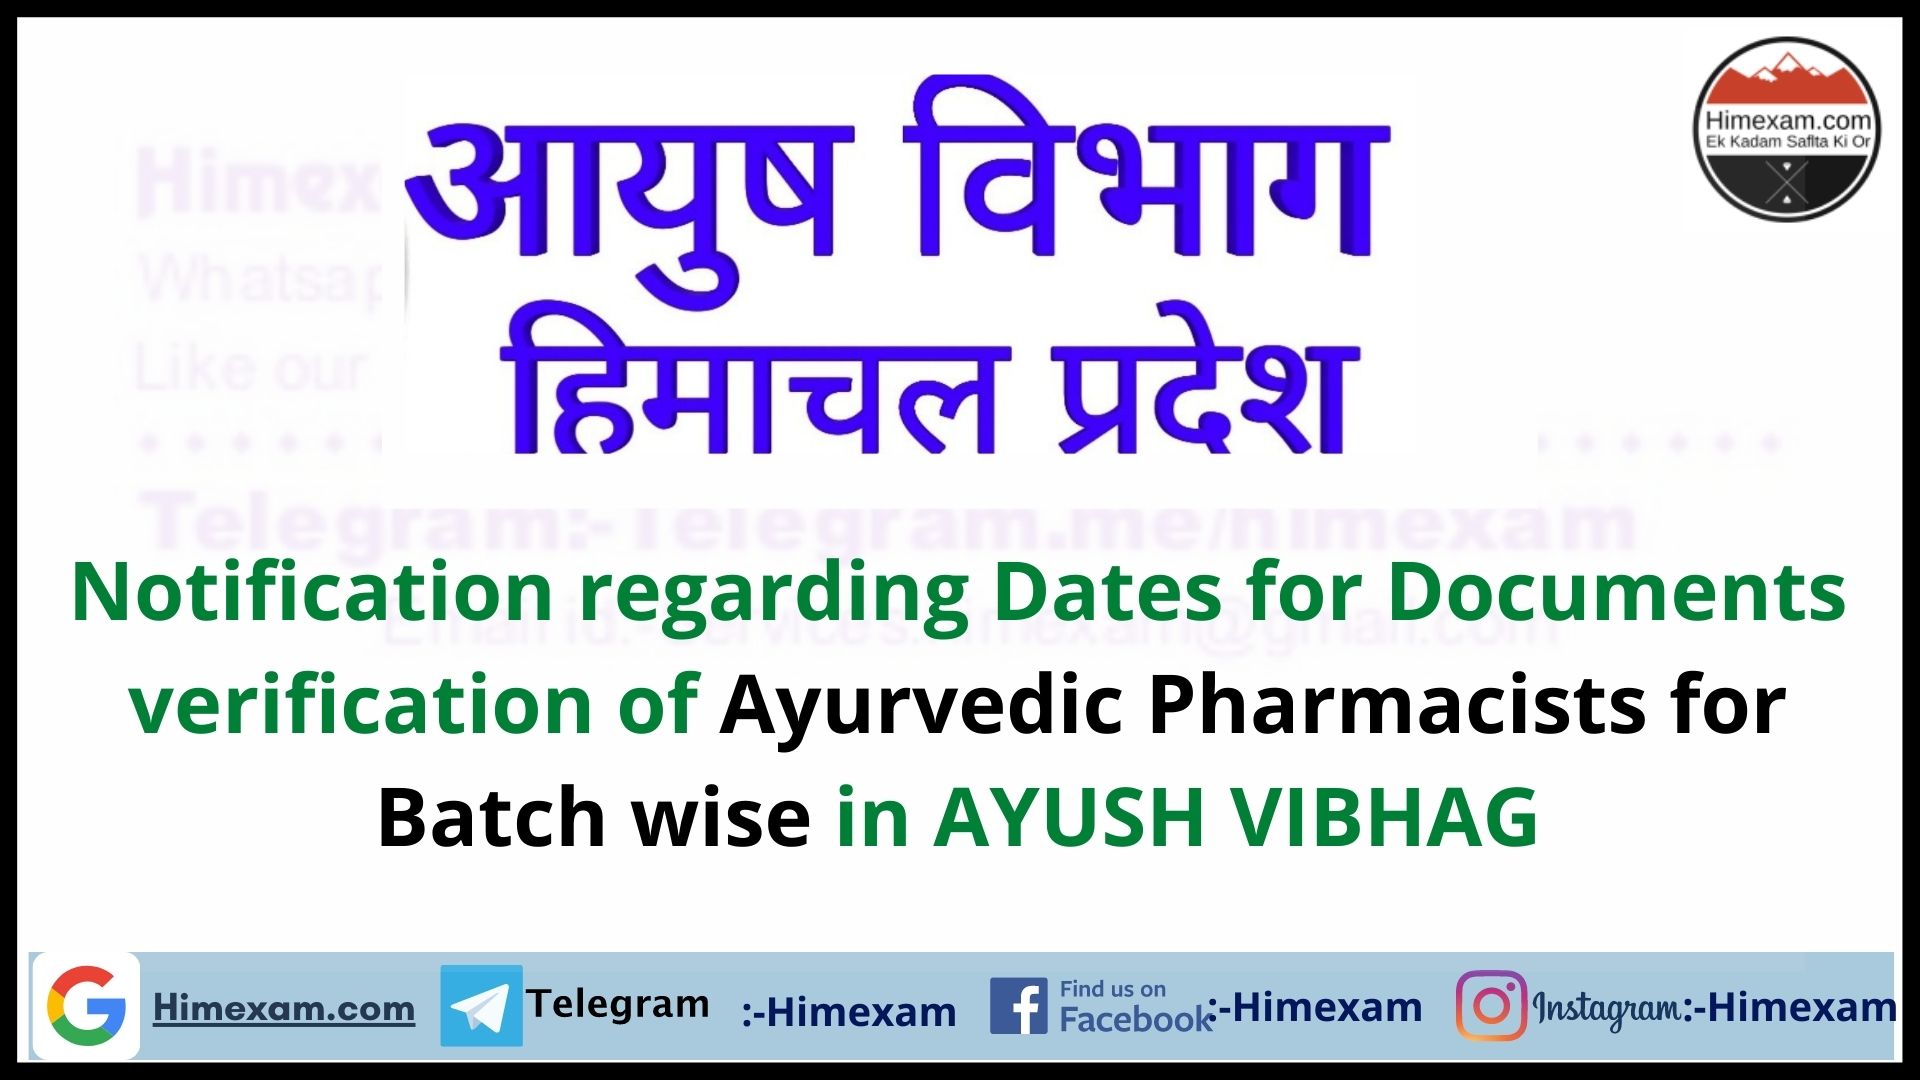 Notification regarding Dates for Documents verification of Ayurvedic Pharmacists for Batch wise in AYUSH VIBHAG